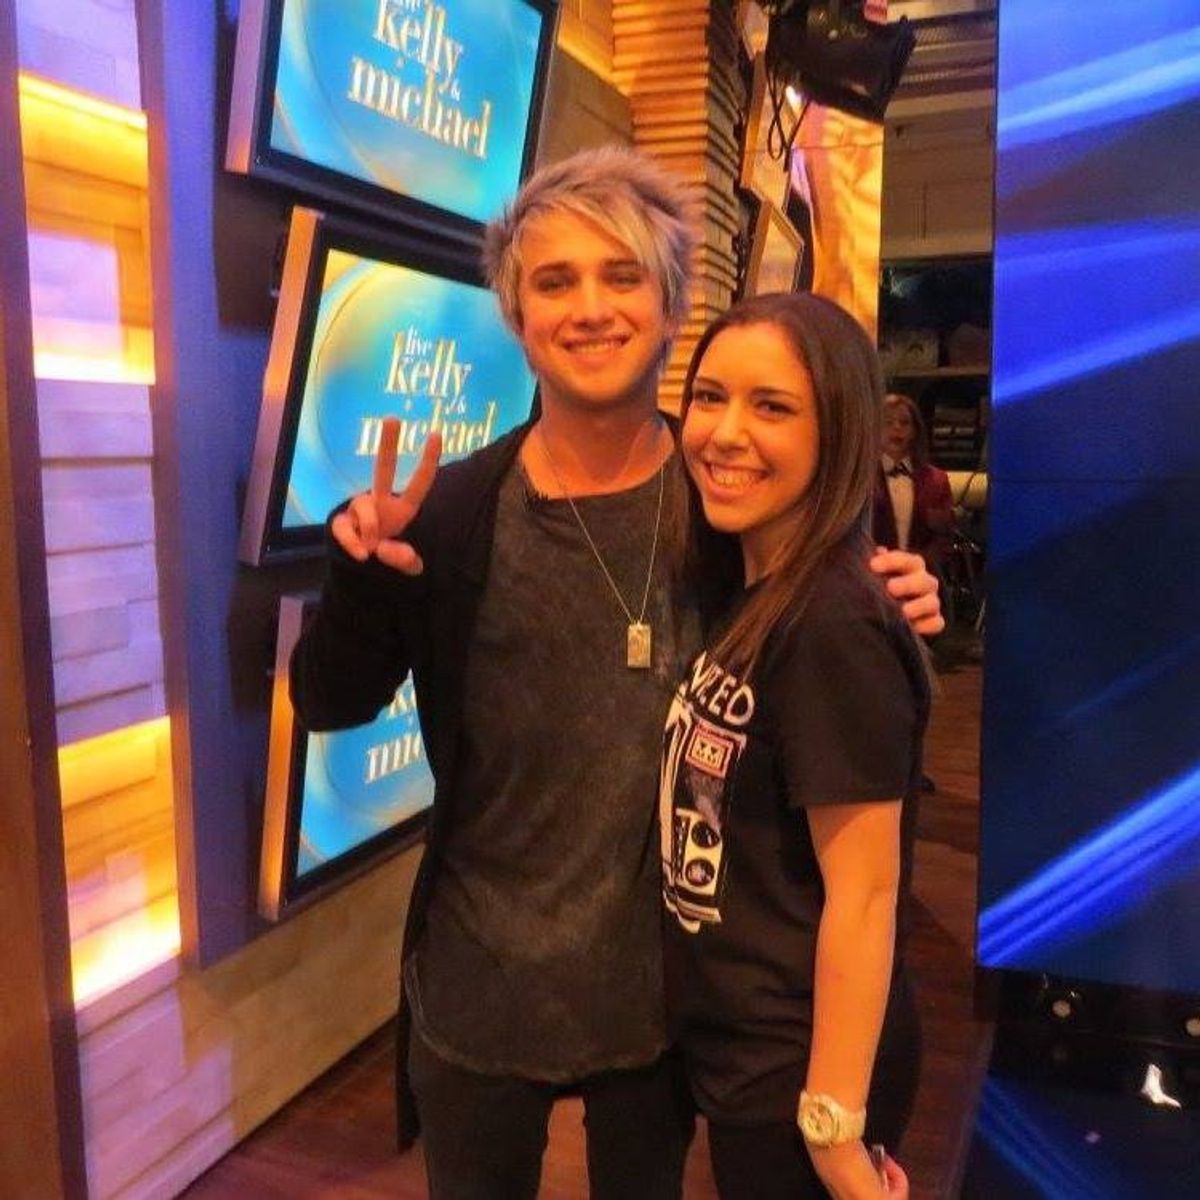 Meeting Dalton Rapattoni Showed Me That Celebrities Do Care About Their Fans